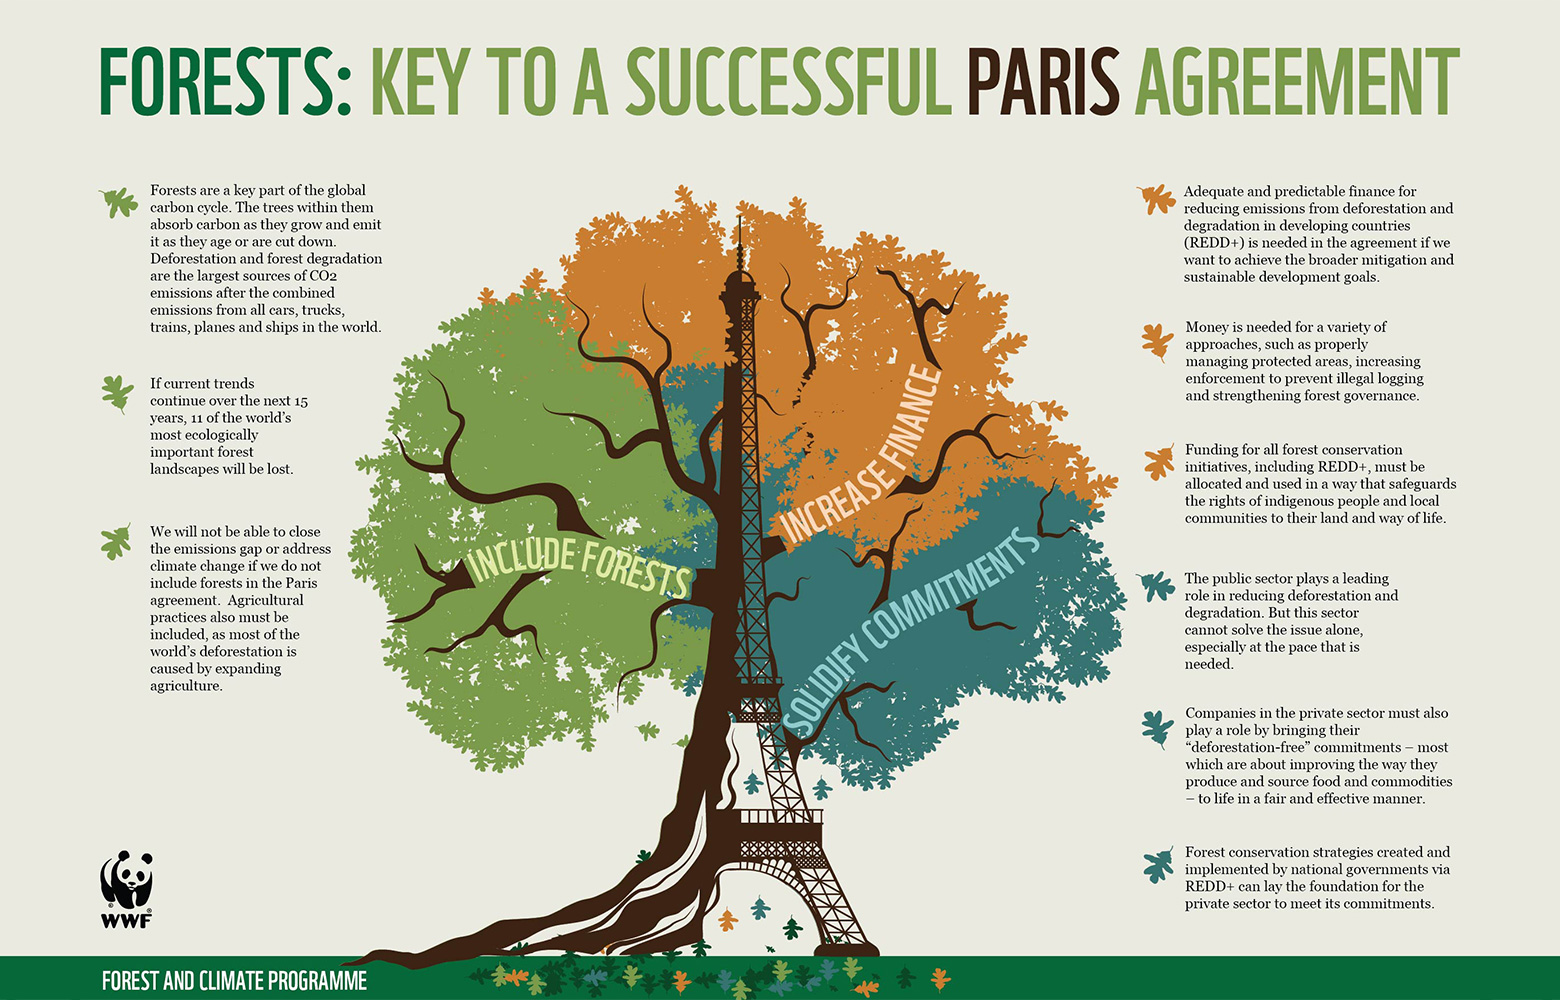 Saving the world’s forests is number one priority for Global Climate Change Summit, COP21 